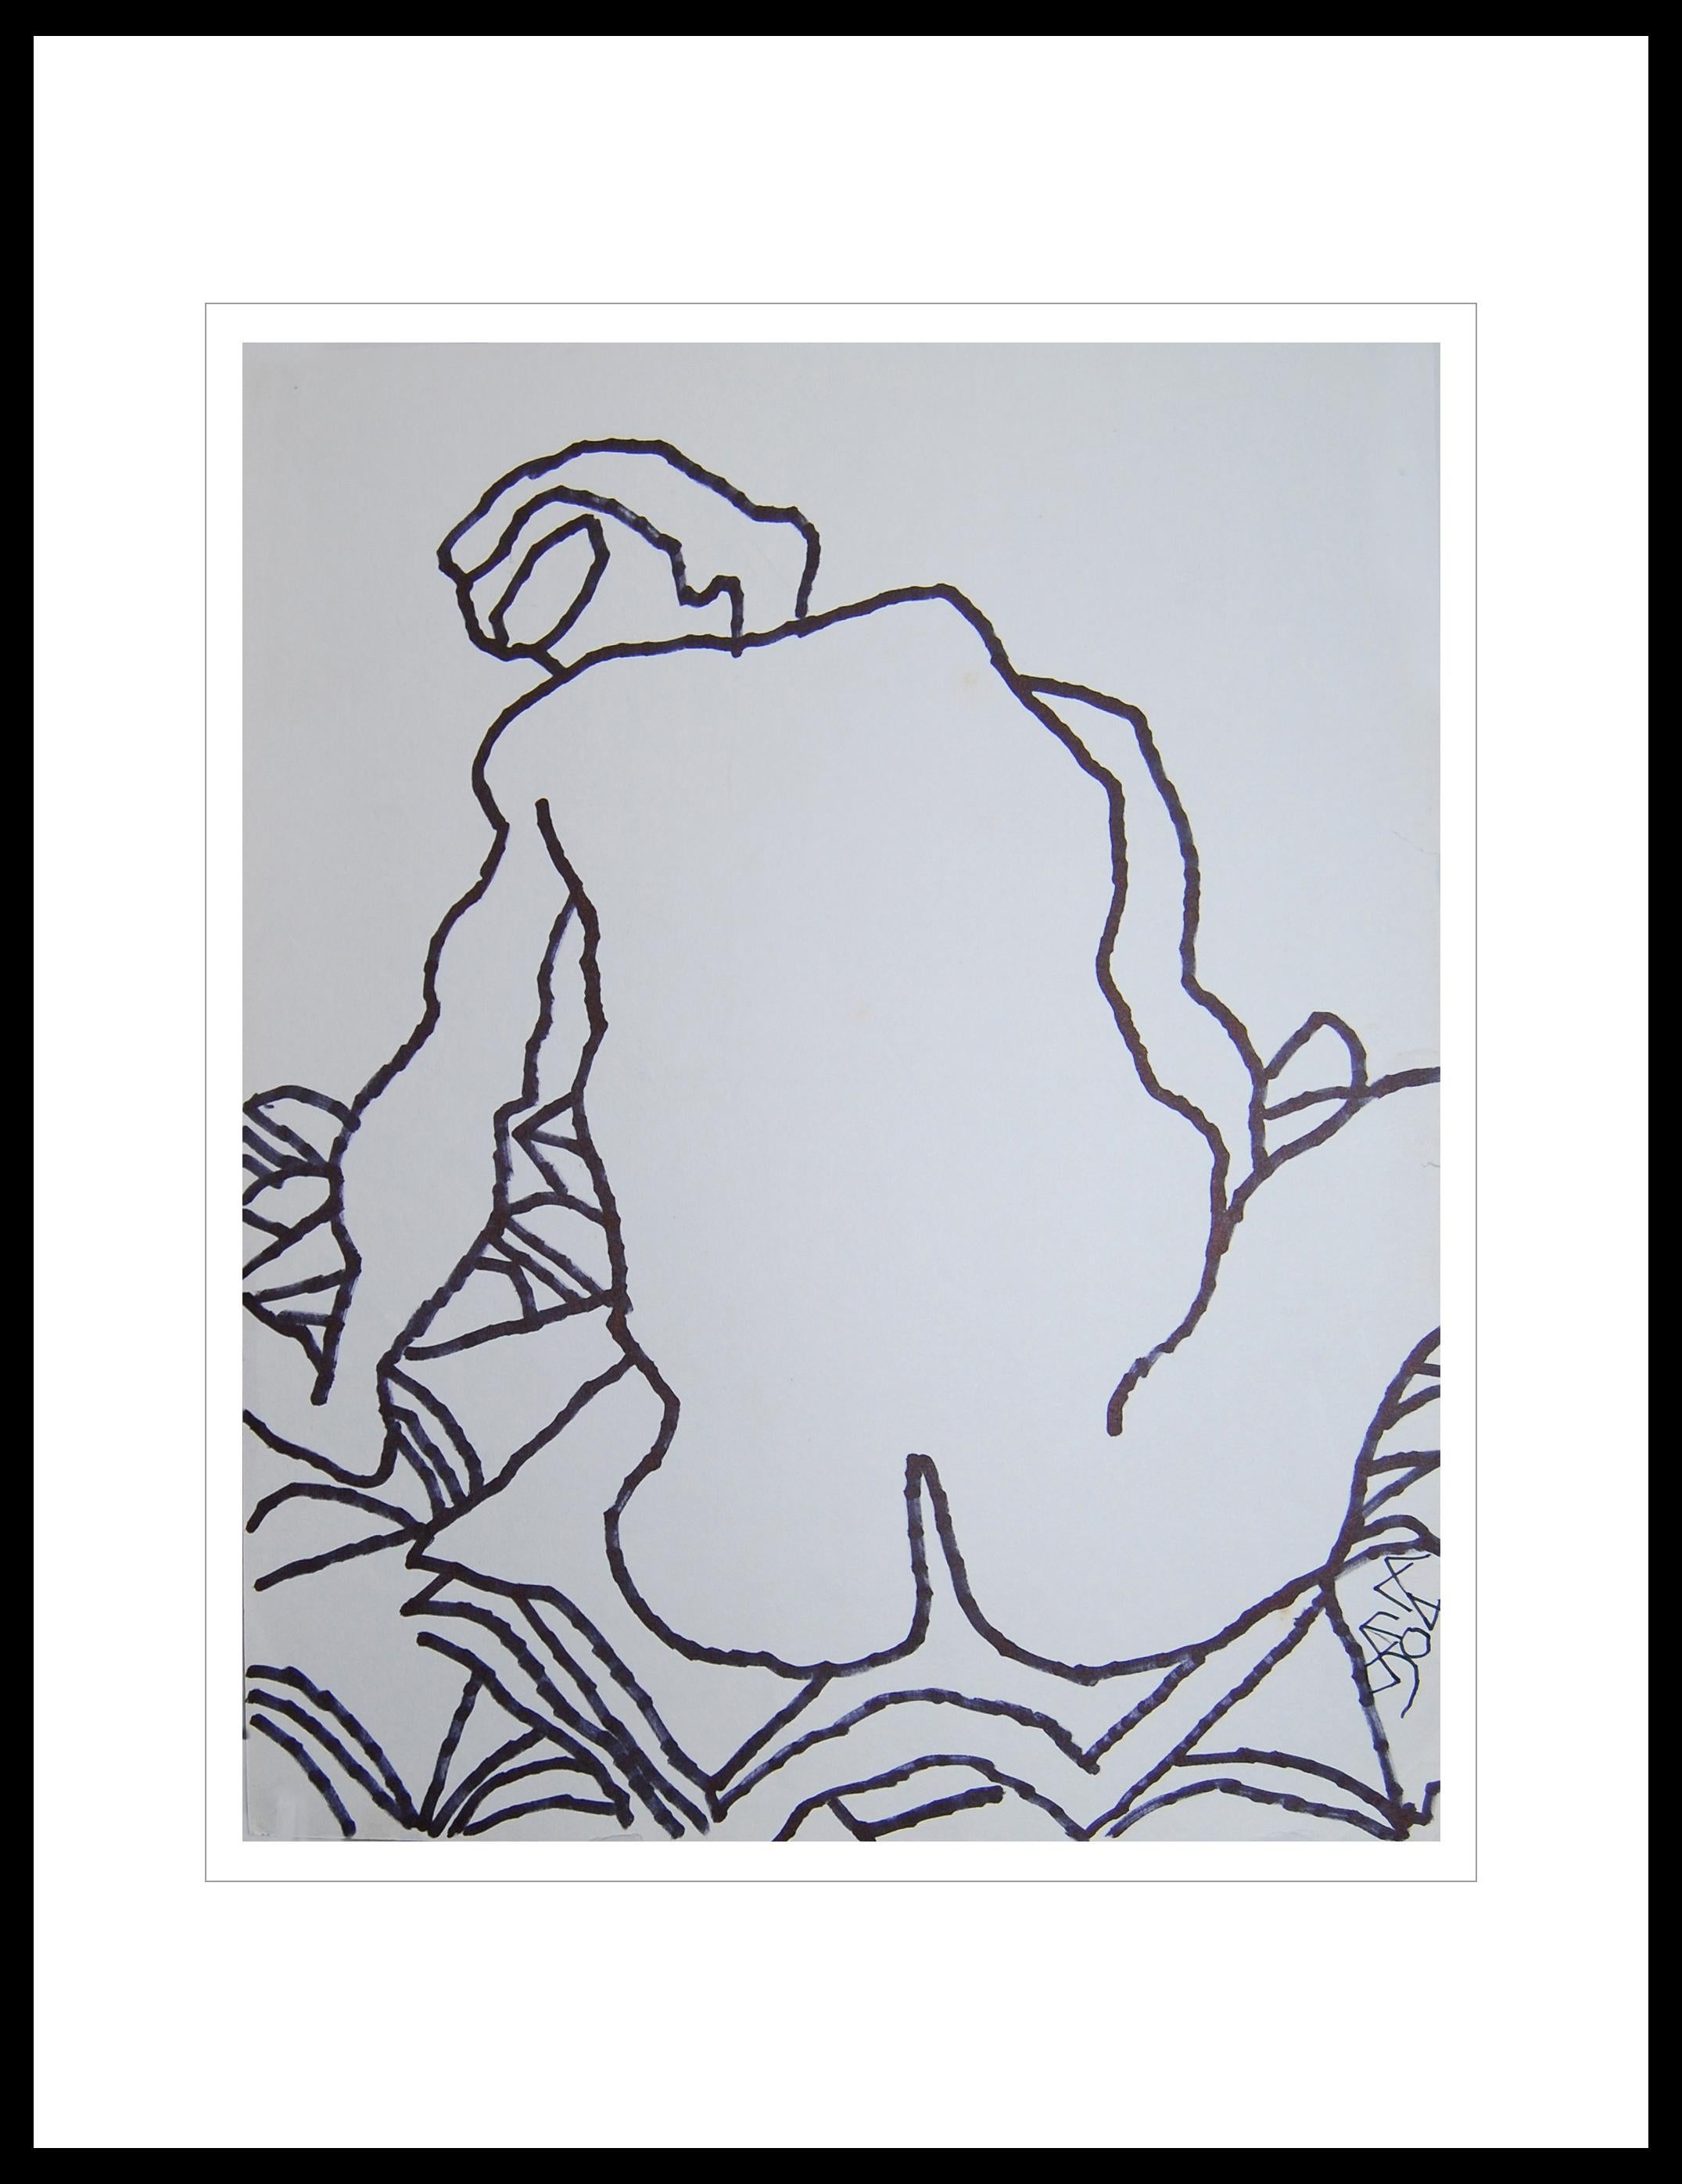 Prakash Karmakar – Untitled – 14 x 11 inches (unframed size)  
Ink on paper  
Signed lower right in Bengali
Inclusive of shipment in roll form.          

Style : Legendary master artist Lt. Prakash Karmakar from Bengal was solely responsible for